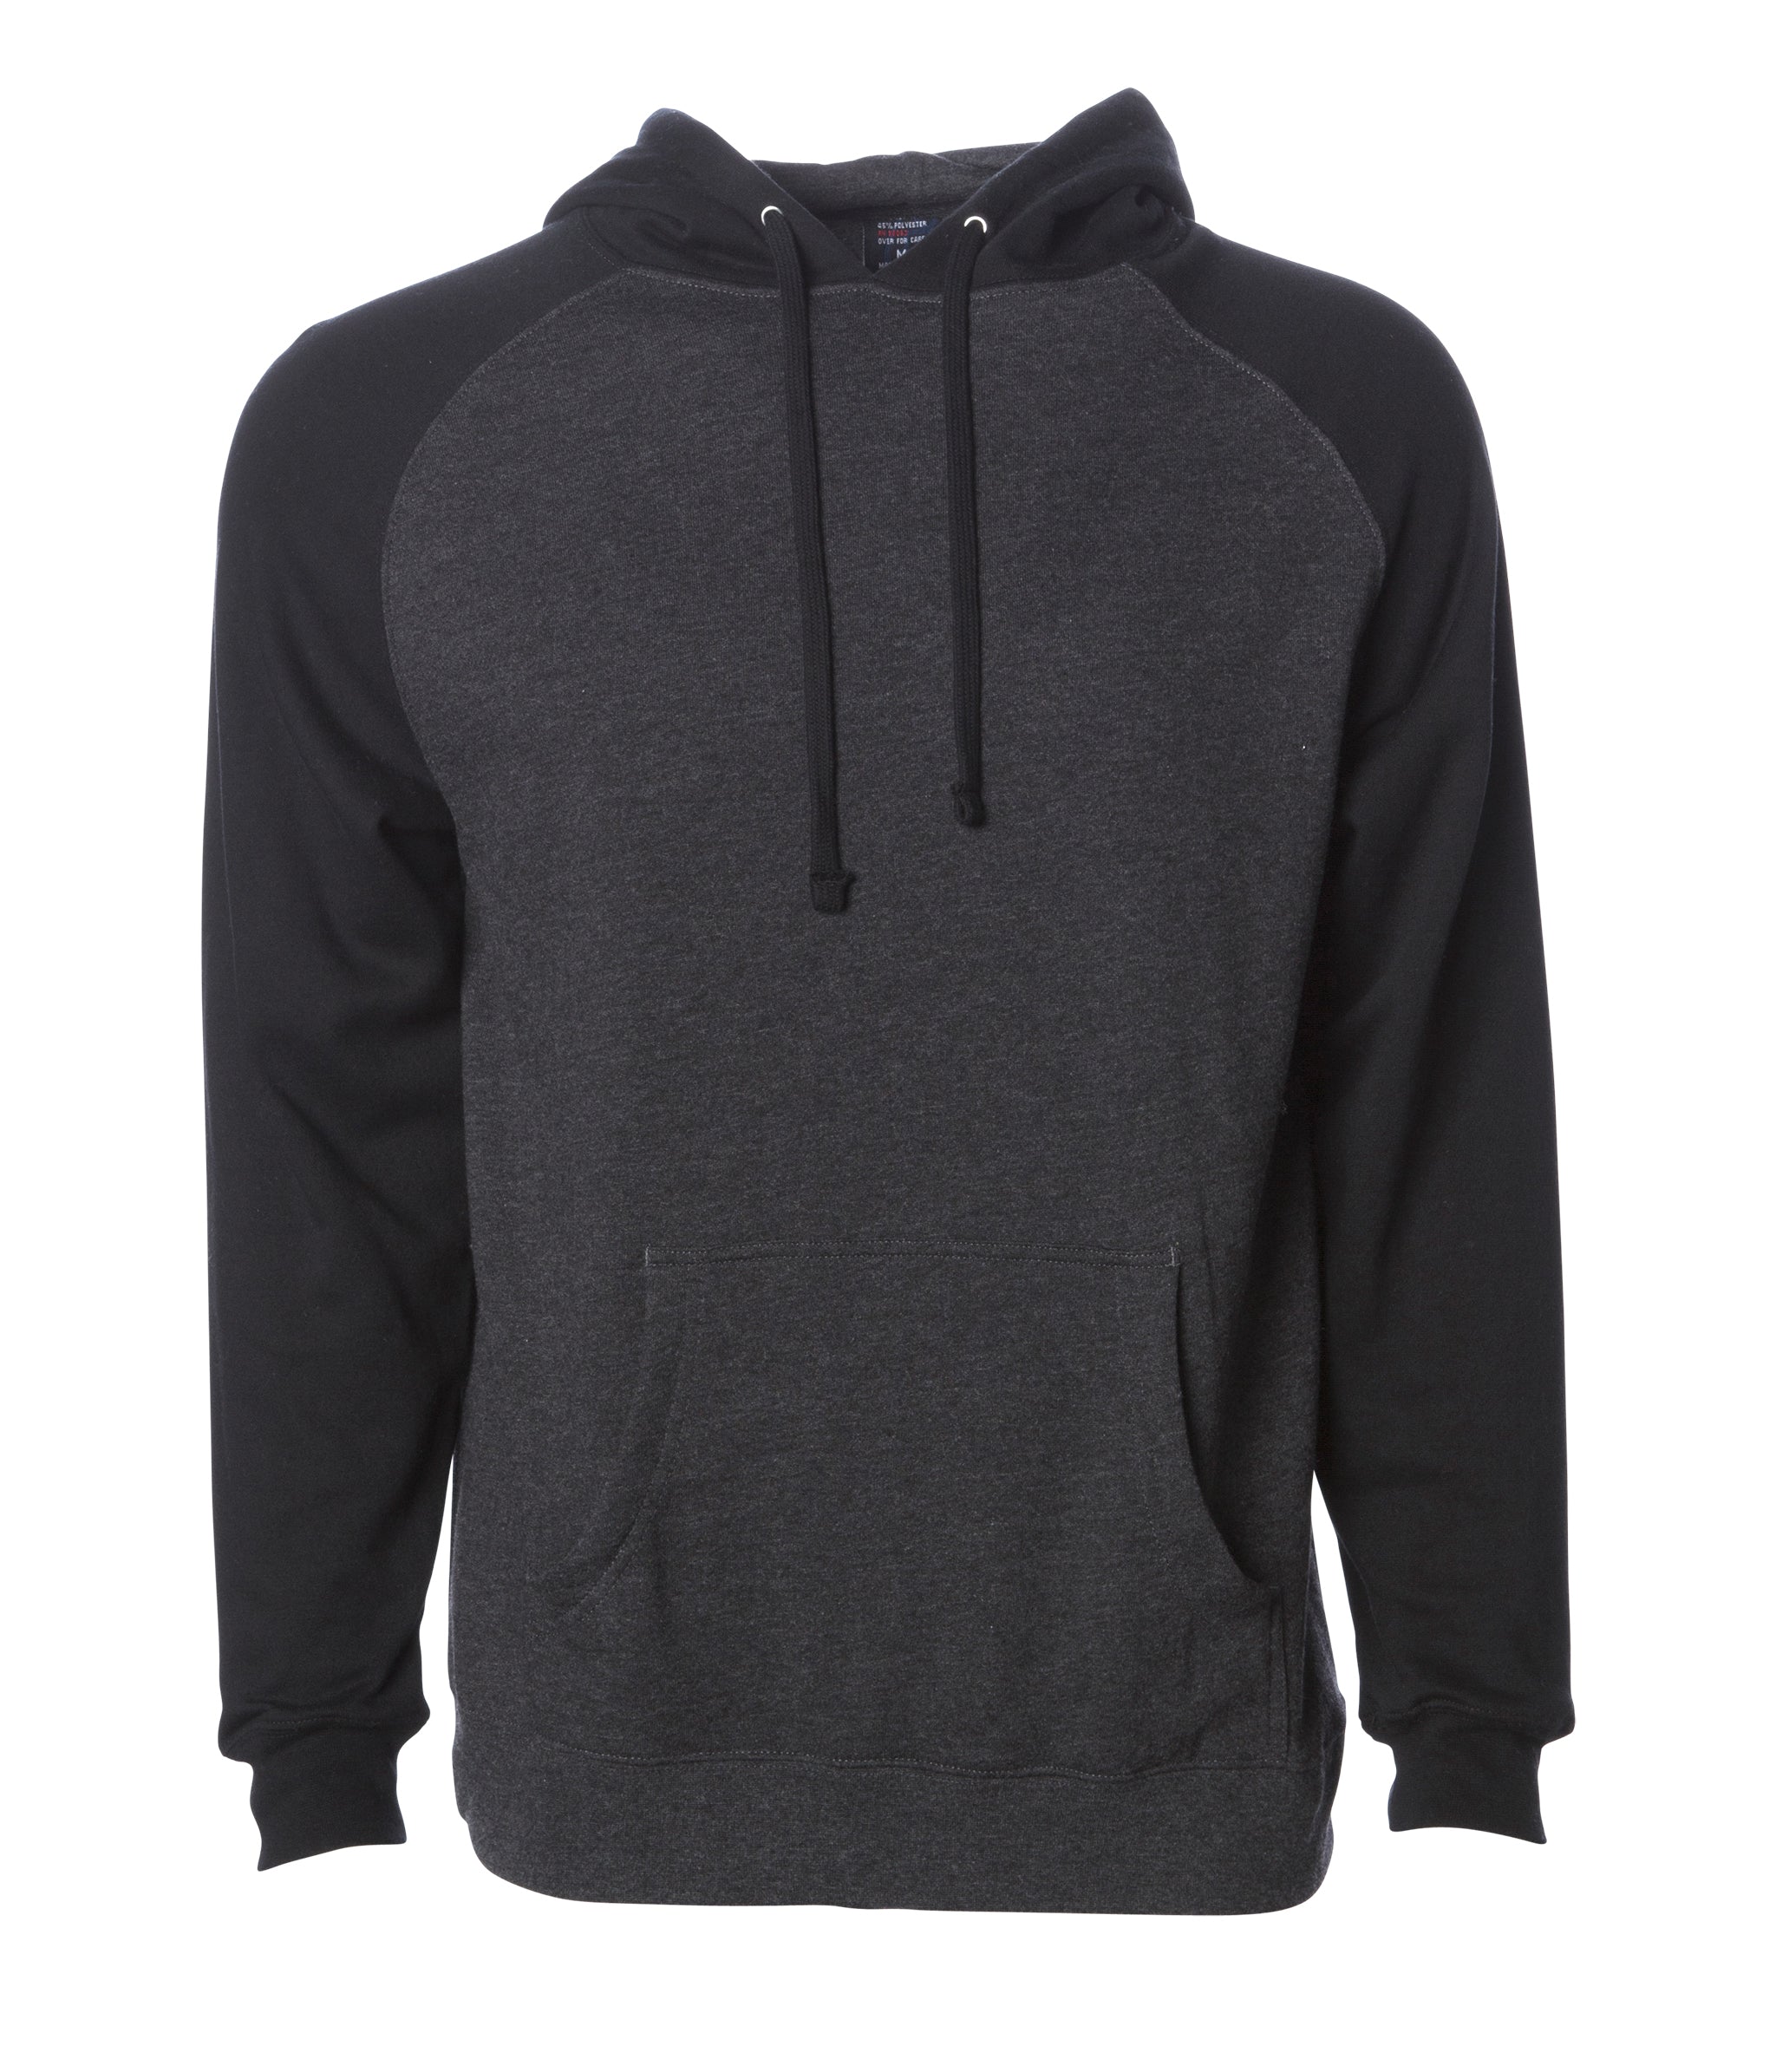 Mens Raglan Hooded Pullover Sweatshirts | Independent Trading Company